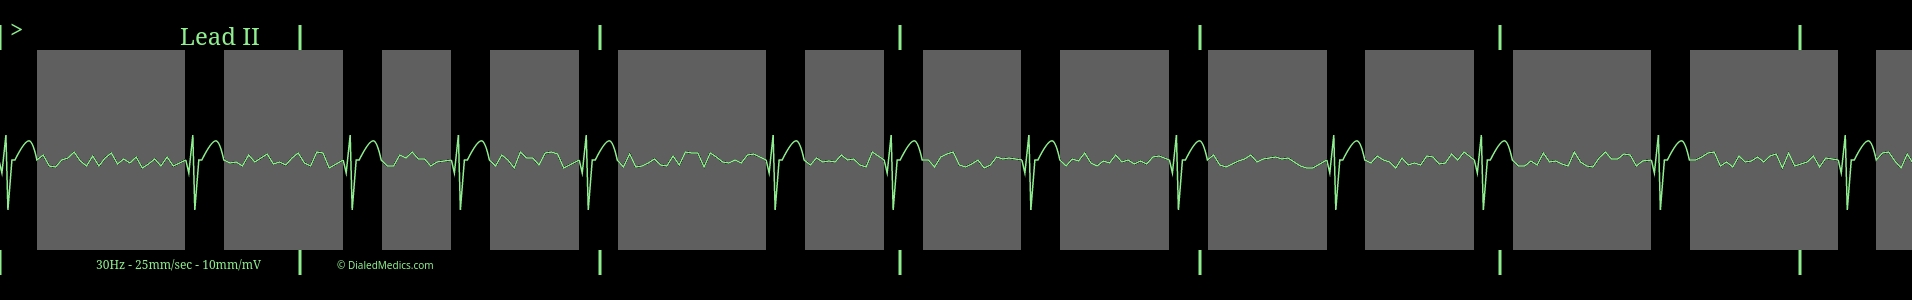 AFib monitor capture with fibrillation waves highlighted in grey.